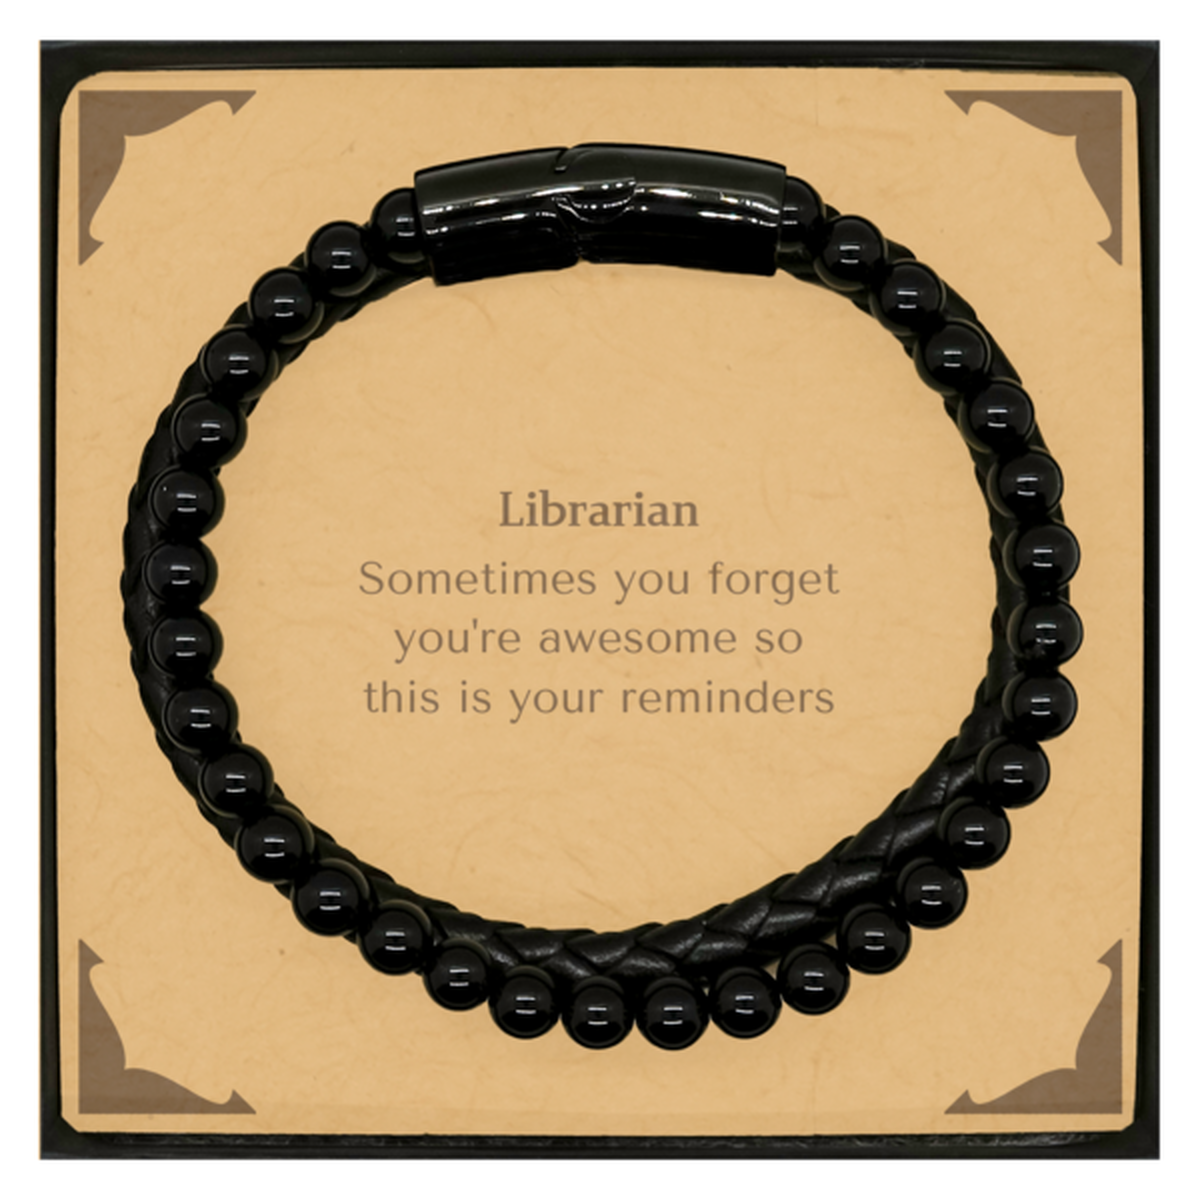 Sentimental Librarian Stone Leather Bracelets, Librarian Sometimes you forget you're awesome so this is your reminders, Graduation Christmas Birthday Gifts for Librarian, Men, Women, Coworkers